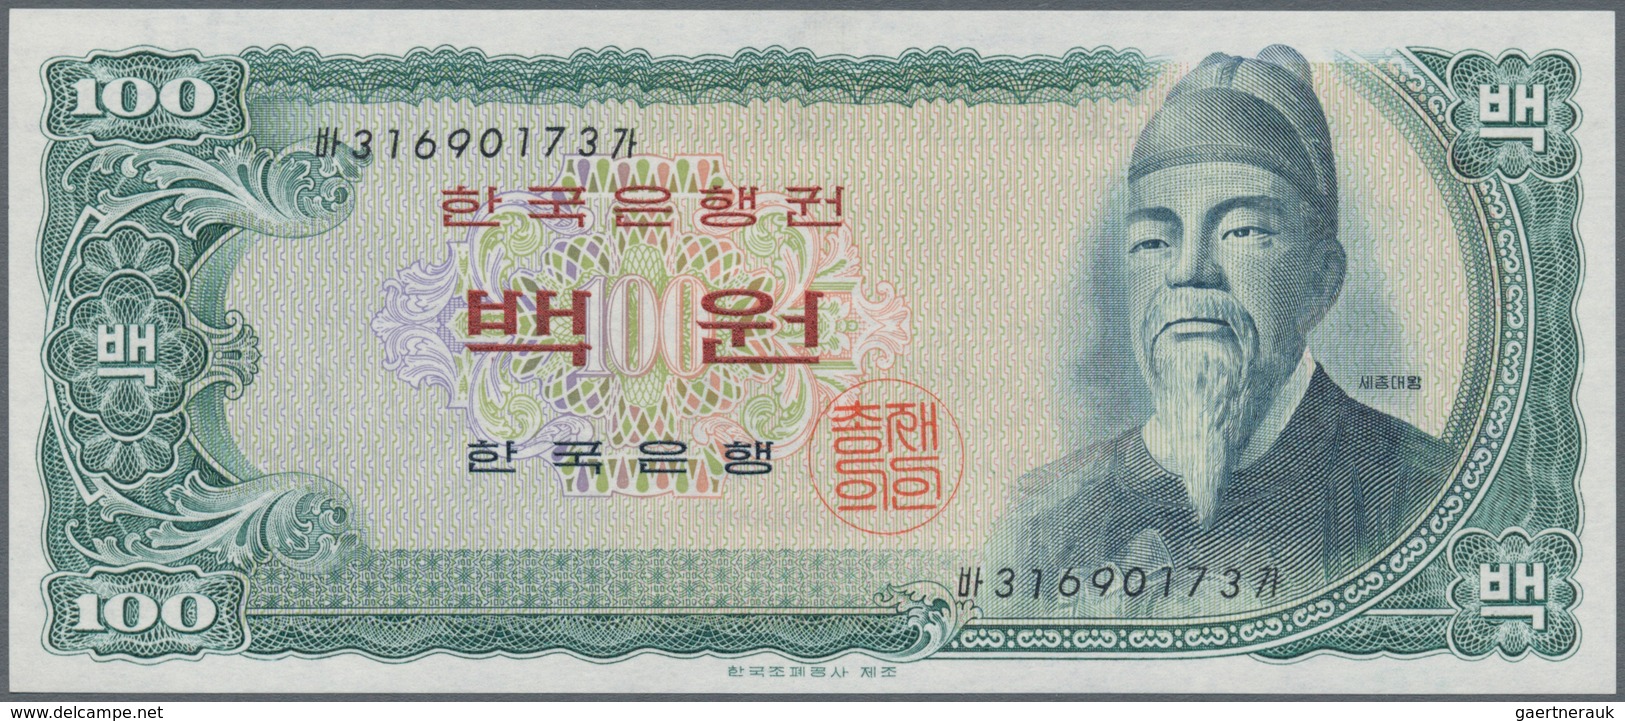 Asia / Asien: set of about 350 mostly different banknotes from Asia for example containing the follo